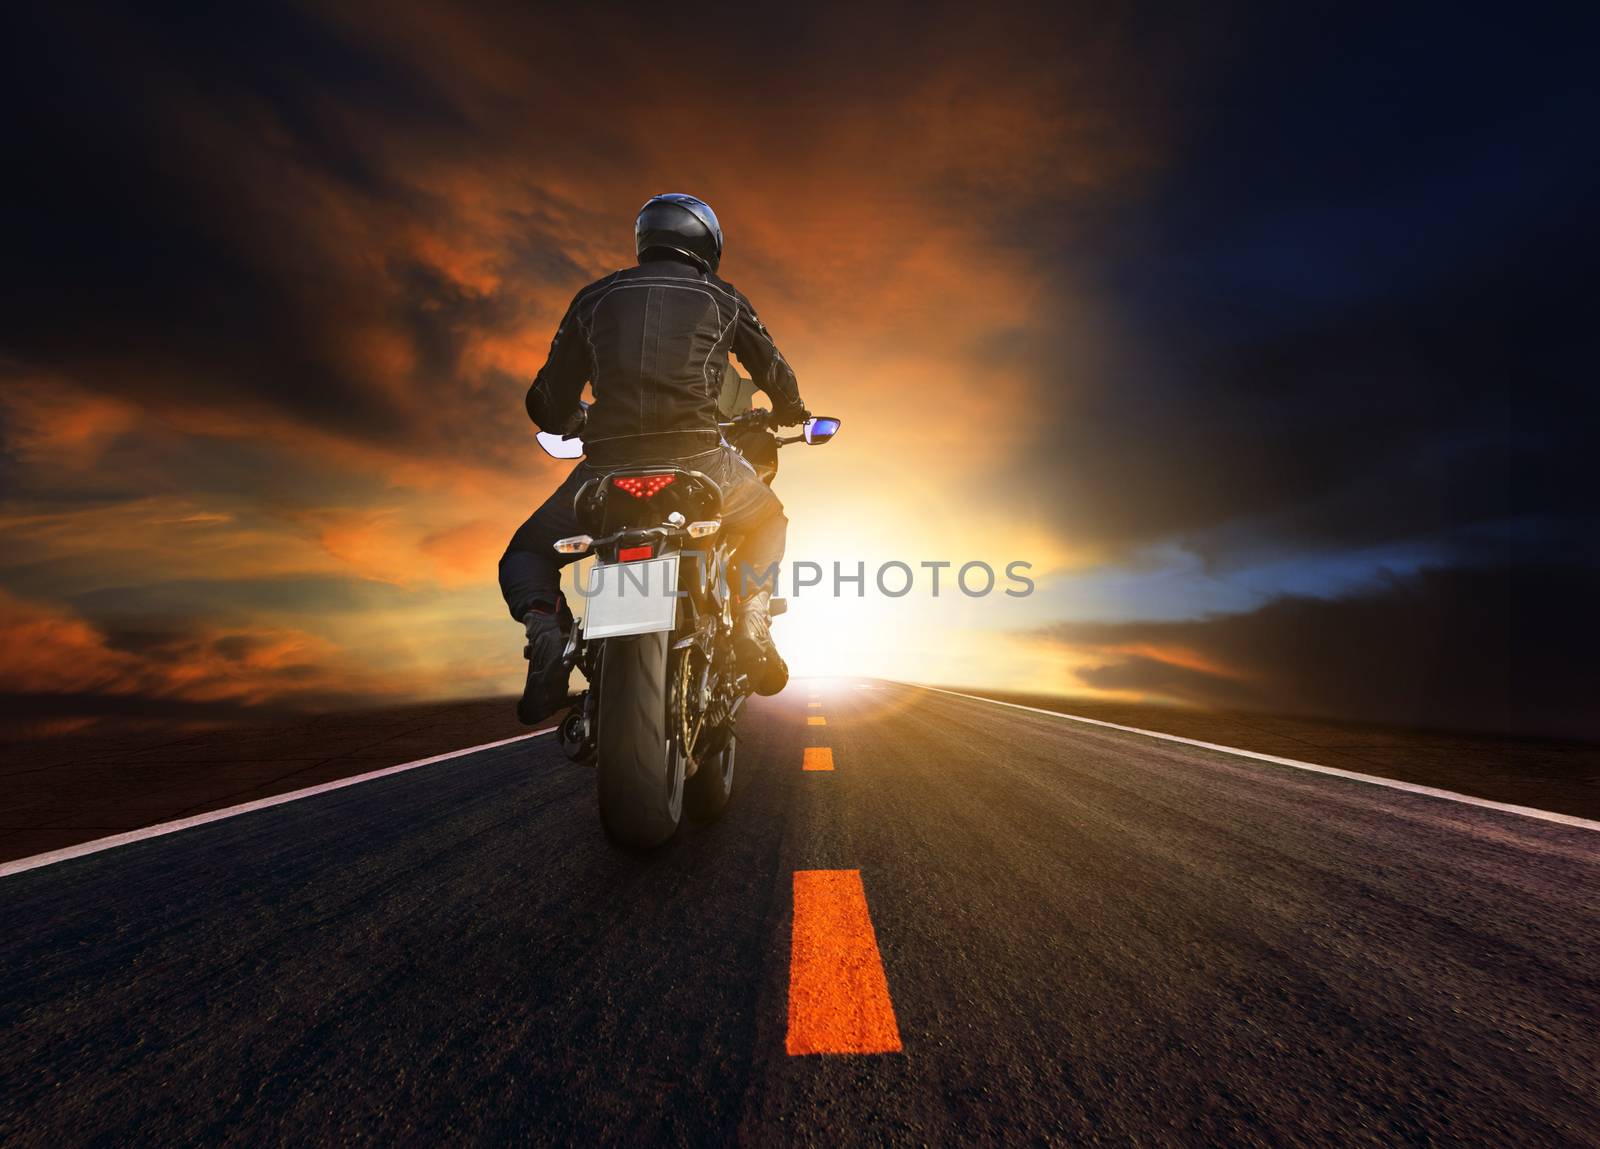 young man riding big motorcycle on asphalt highway use for people leisure and motorsport activities